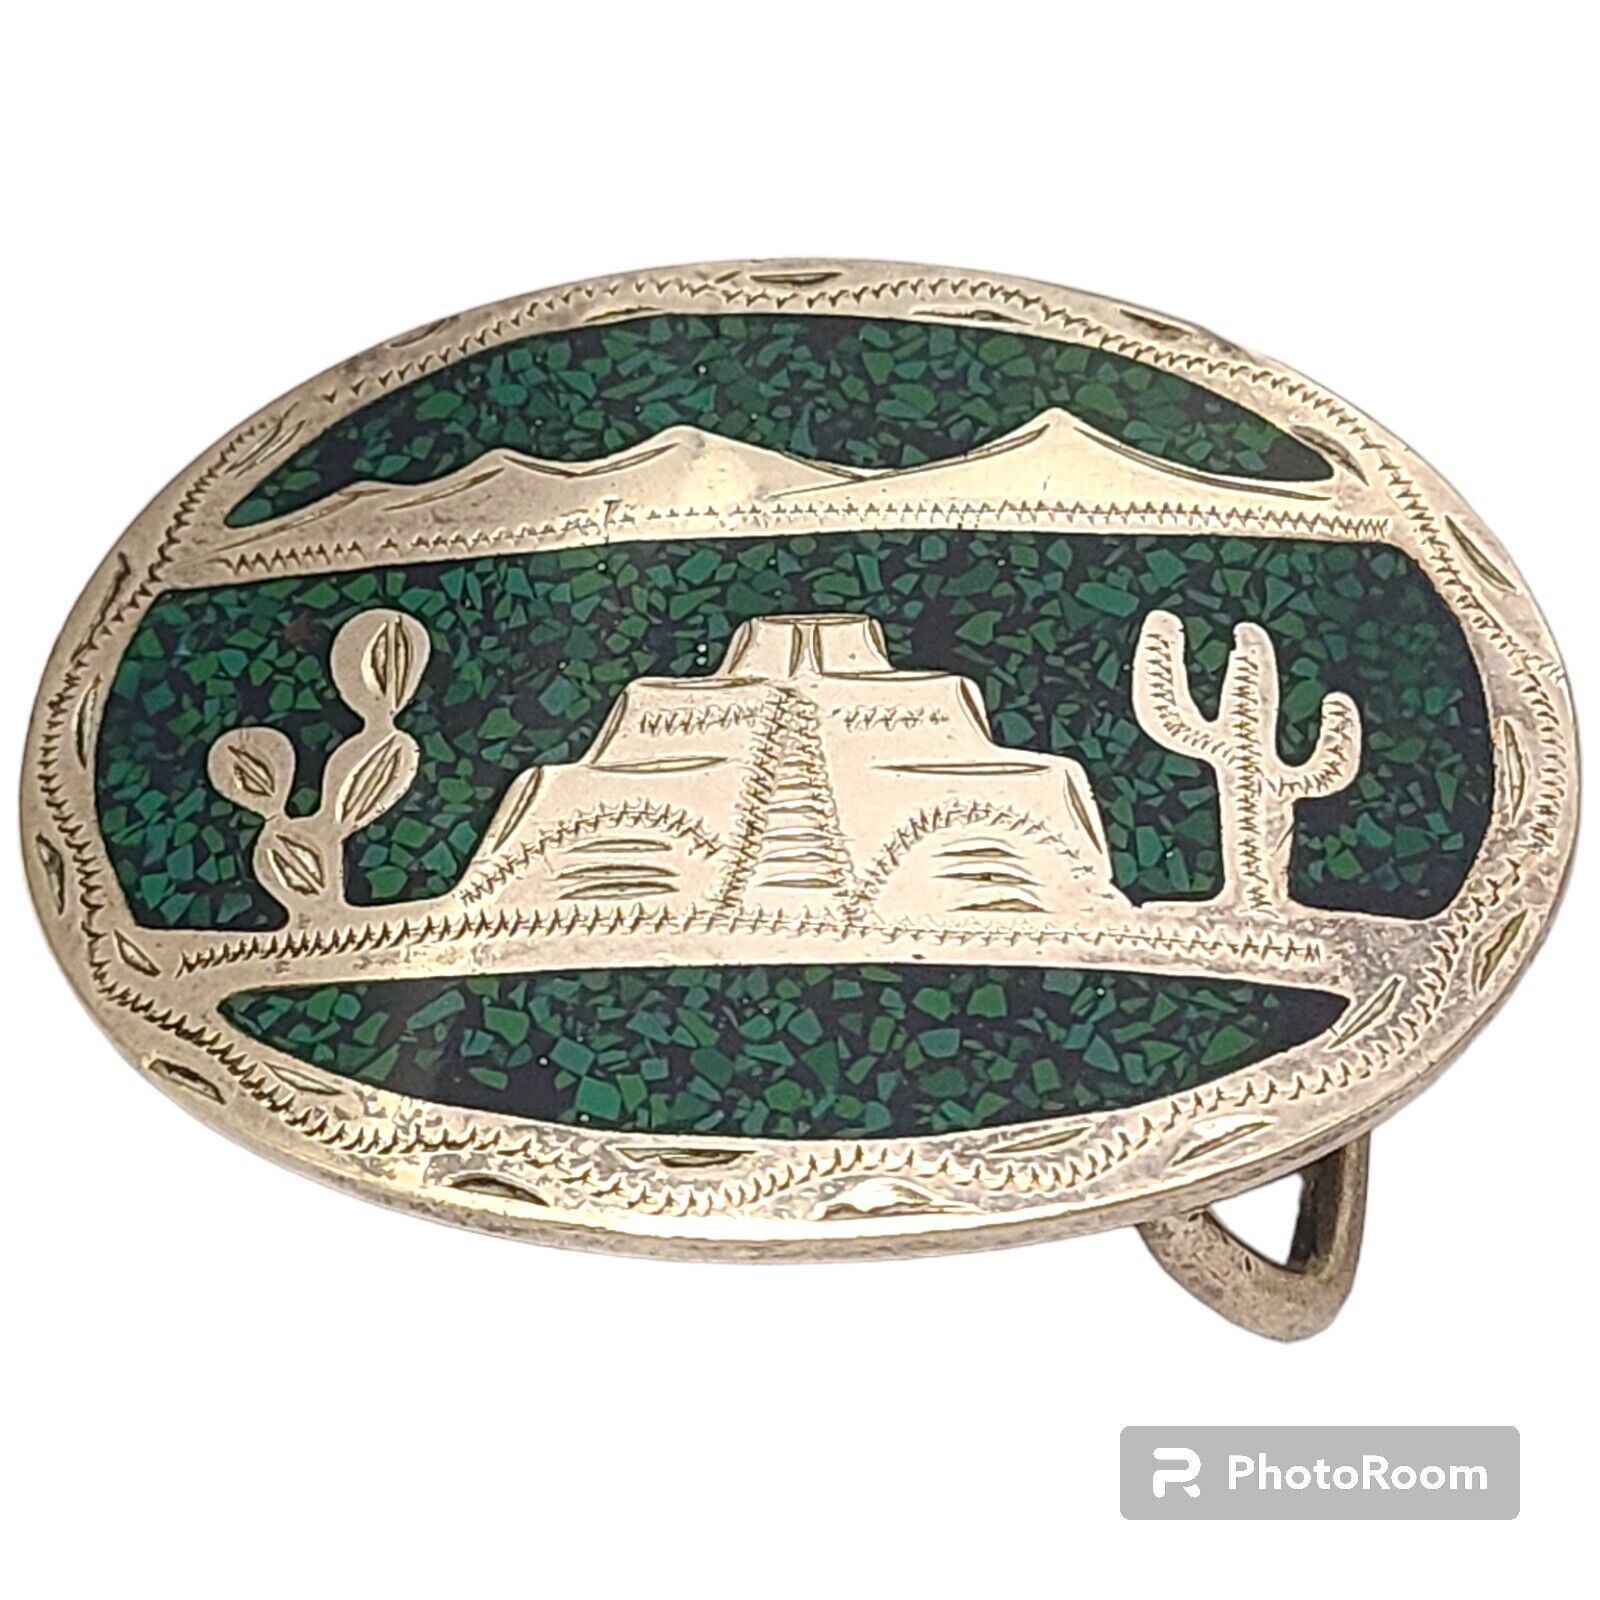 Taxco Arenas Mexico Sterling Silver 1960s Aztec Temple Design Art Belt Buckle